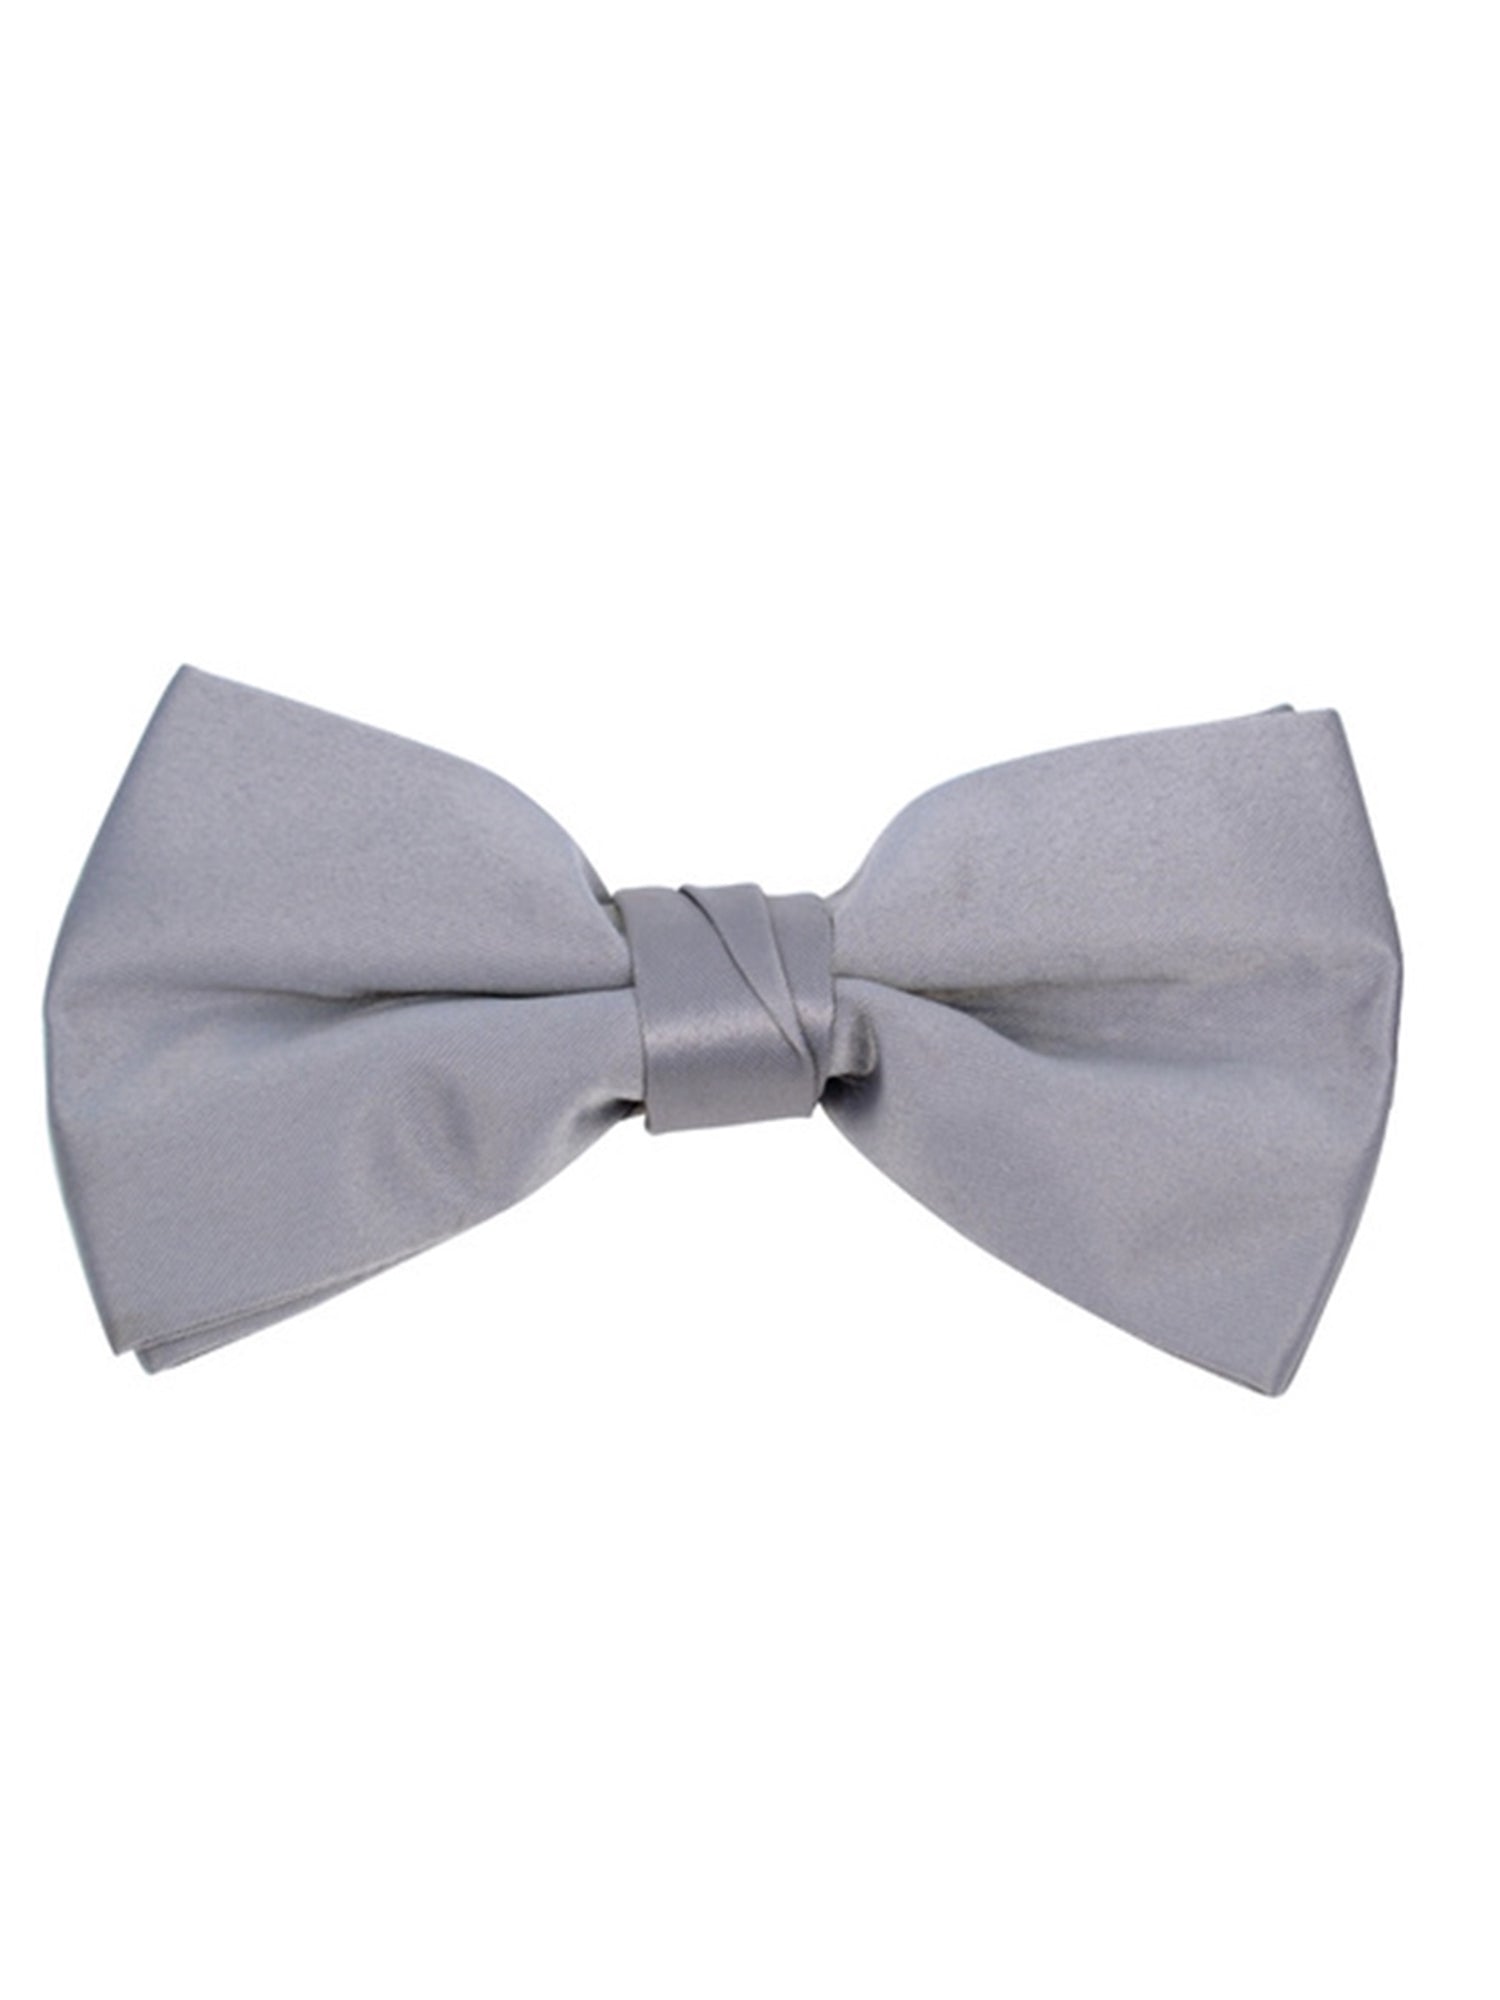 Young Boy's Pre-tied Clip On Bow Tie - Formal Tuxedo Solid Color Boy's Solid Color Bow Tie TheDapperTie Gray One Size 